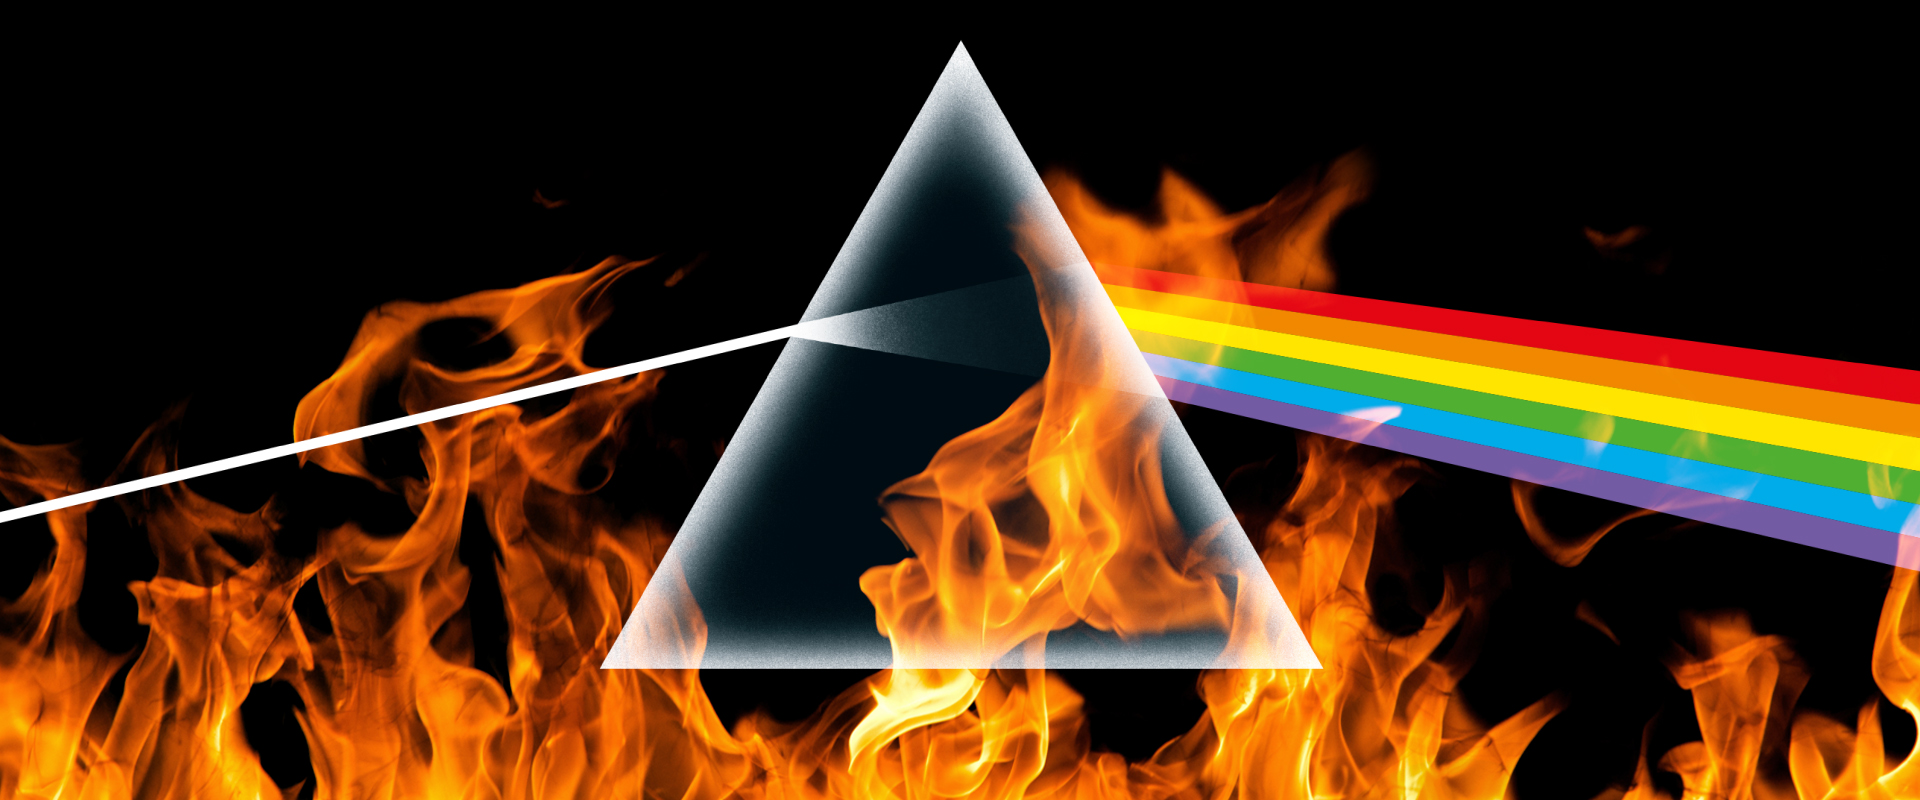 Pourquoi "The Dark Side Of The Moon Redux" de Roger Waters m'emmerde